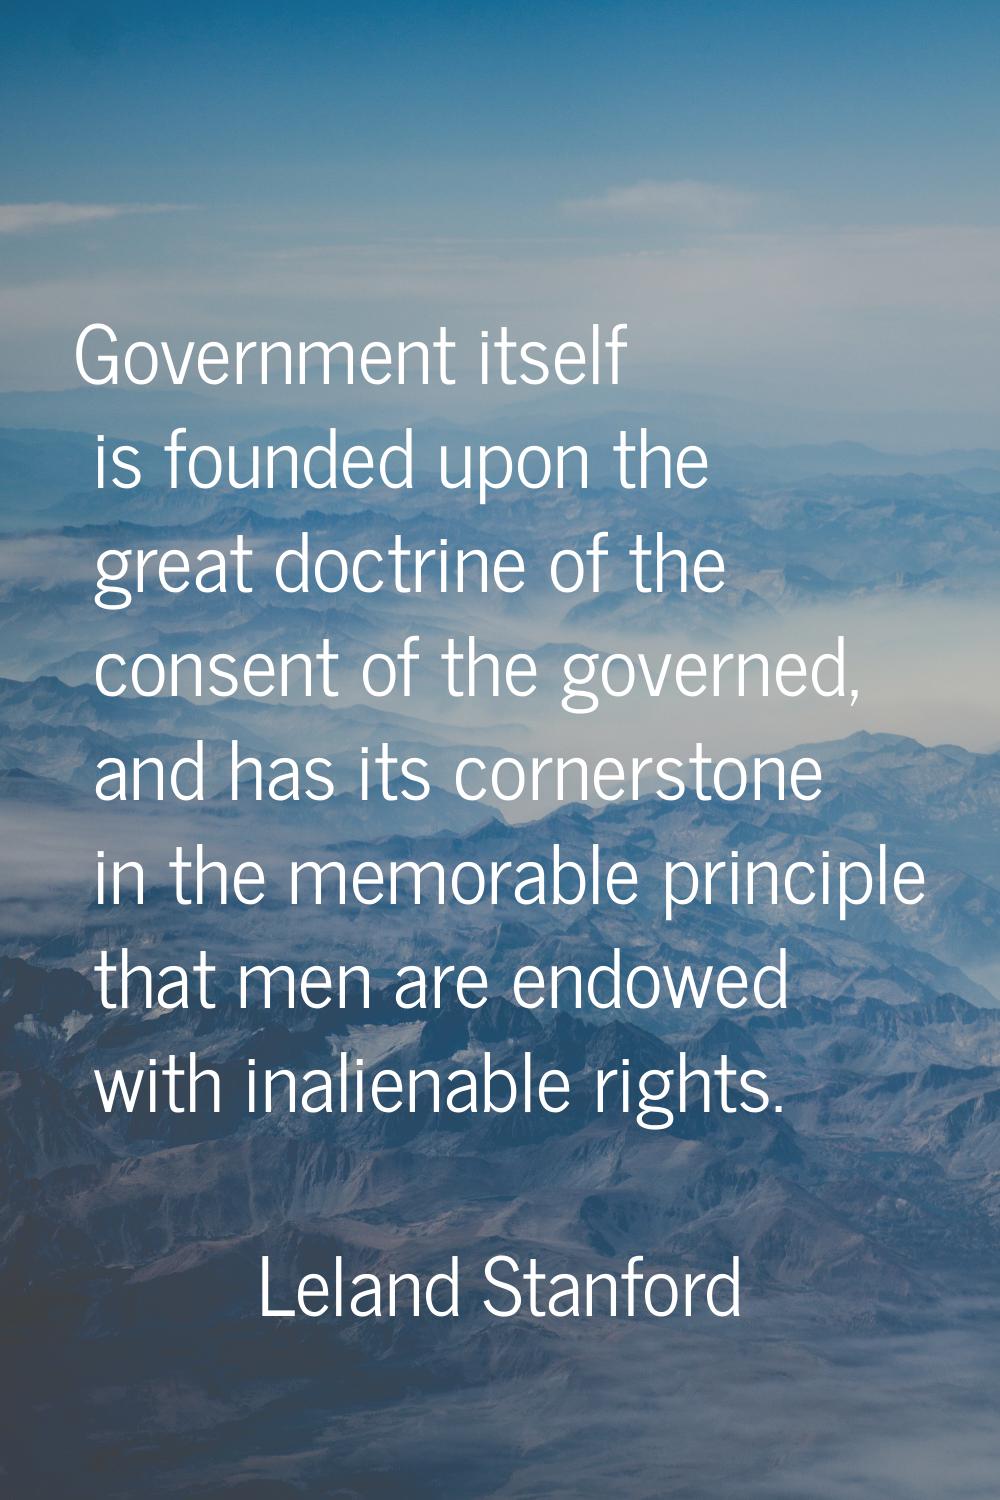 Government itself is founded upon the great doctrine of the consent of the governed, and has its co